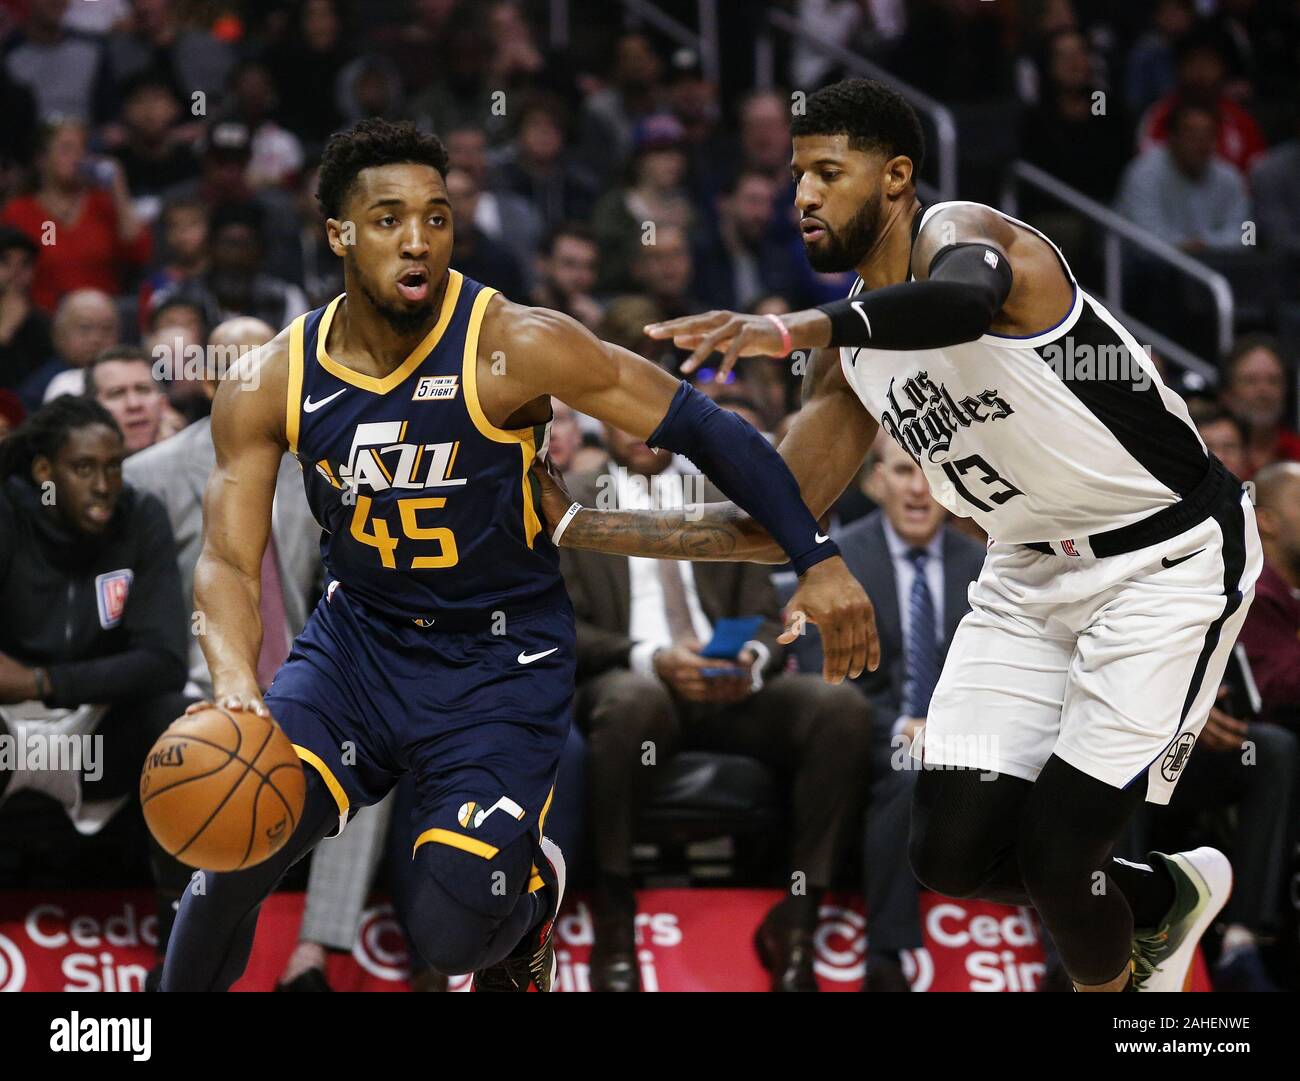 Los Angeles, California, USA. 28th Dec, 2019. Utah Jazz's Donovan Mitchell (45) drives against Los Angeles Clippers' Paul George (13) during an NBA basketball game between Los Angeles Clippers and Utah Jazz, Saturday, December 28, 2019, in Los Angeles. Credit: Ringo Chiu/ZUMA Wire/Alamy Live News Stock Photo